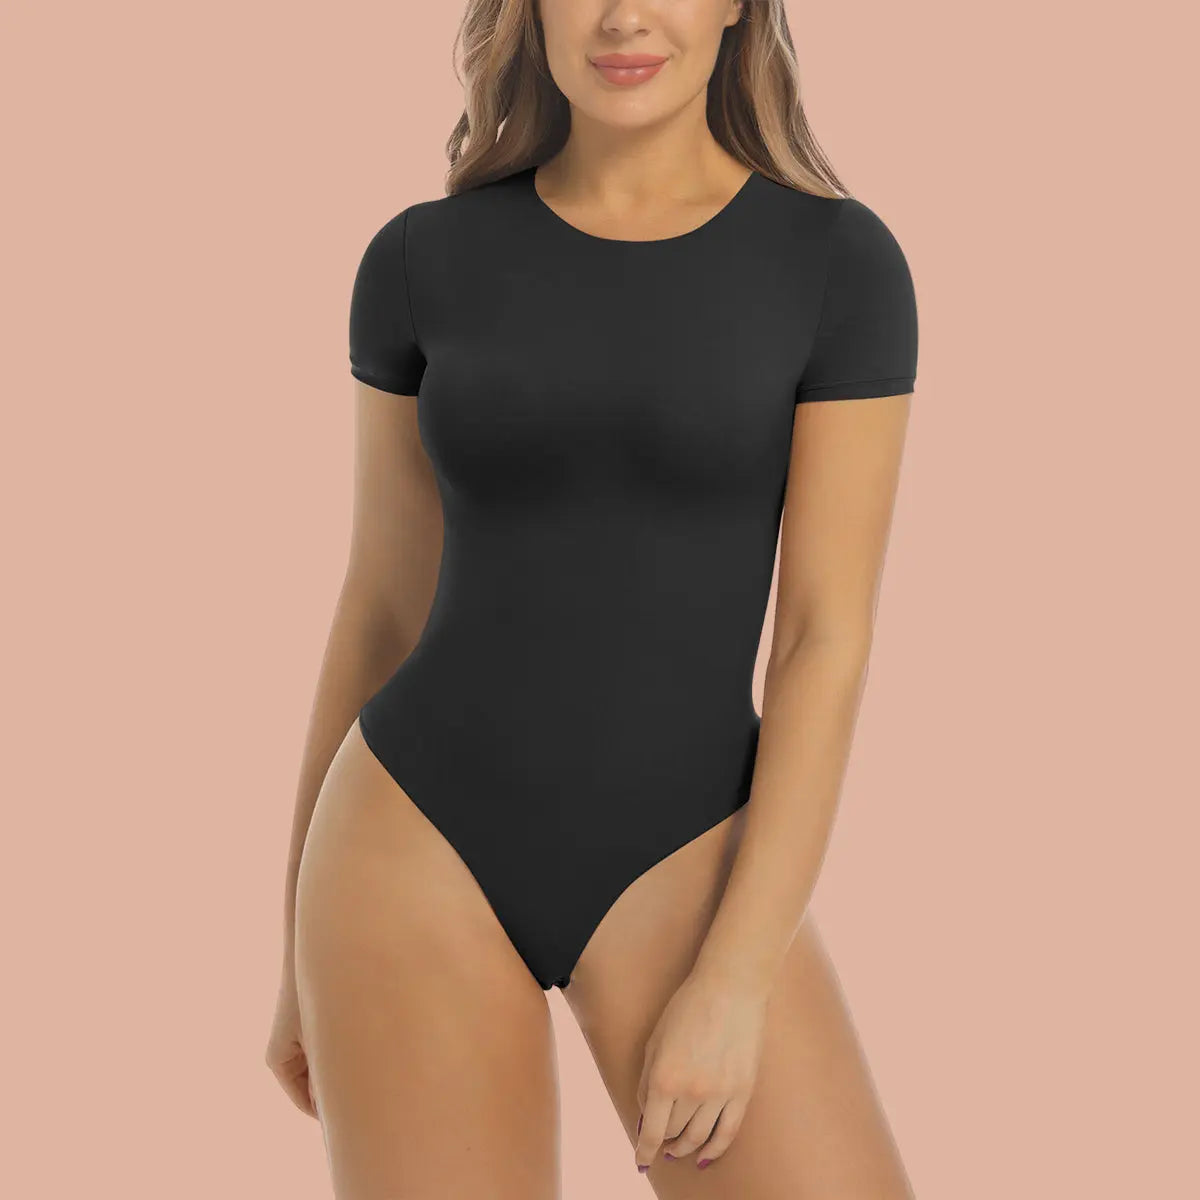 TShirt Bodysuit Tops For Women Soft Body Suits Fit Thong Ladies